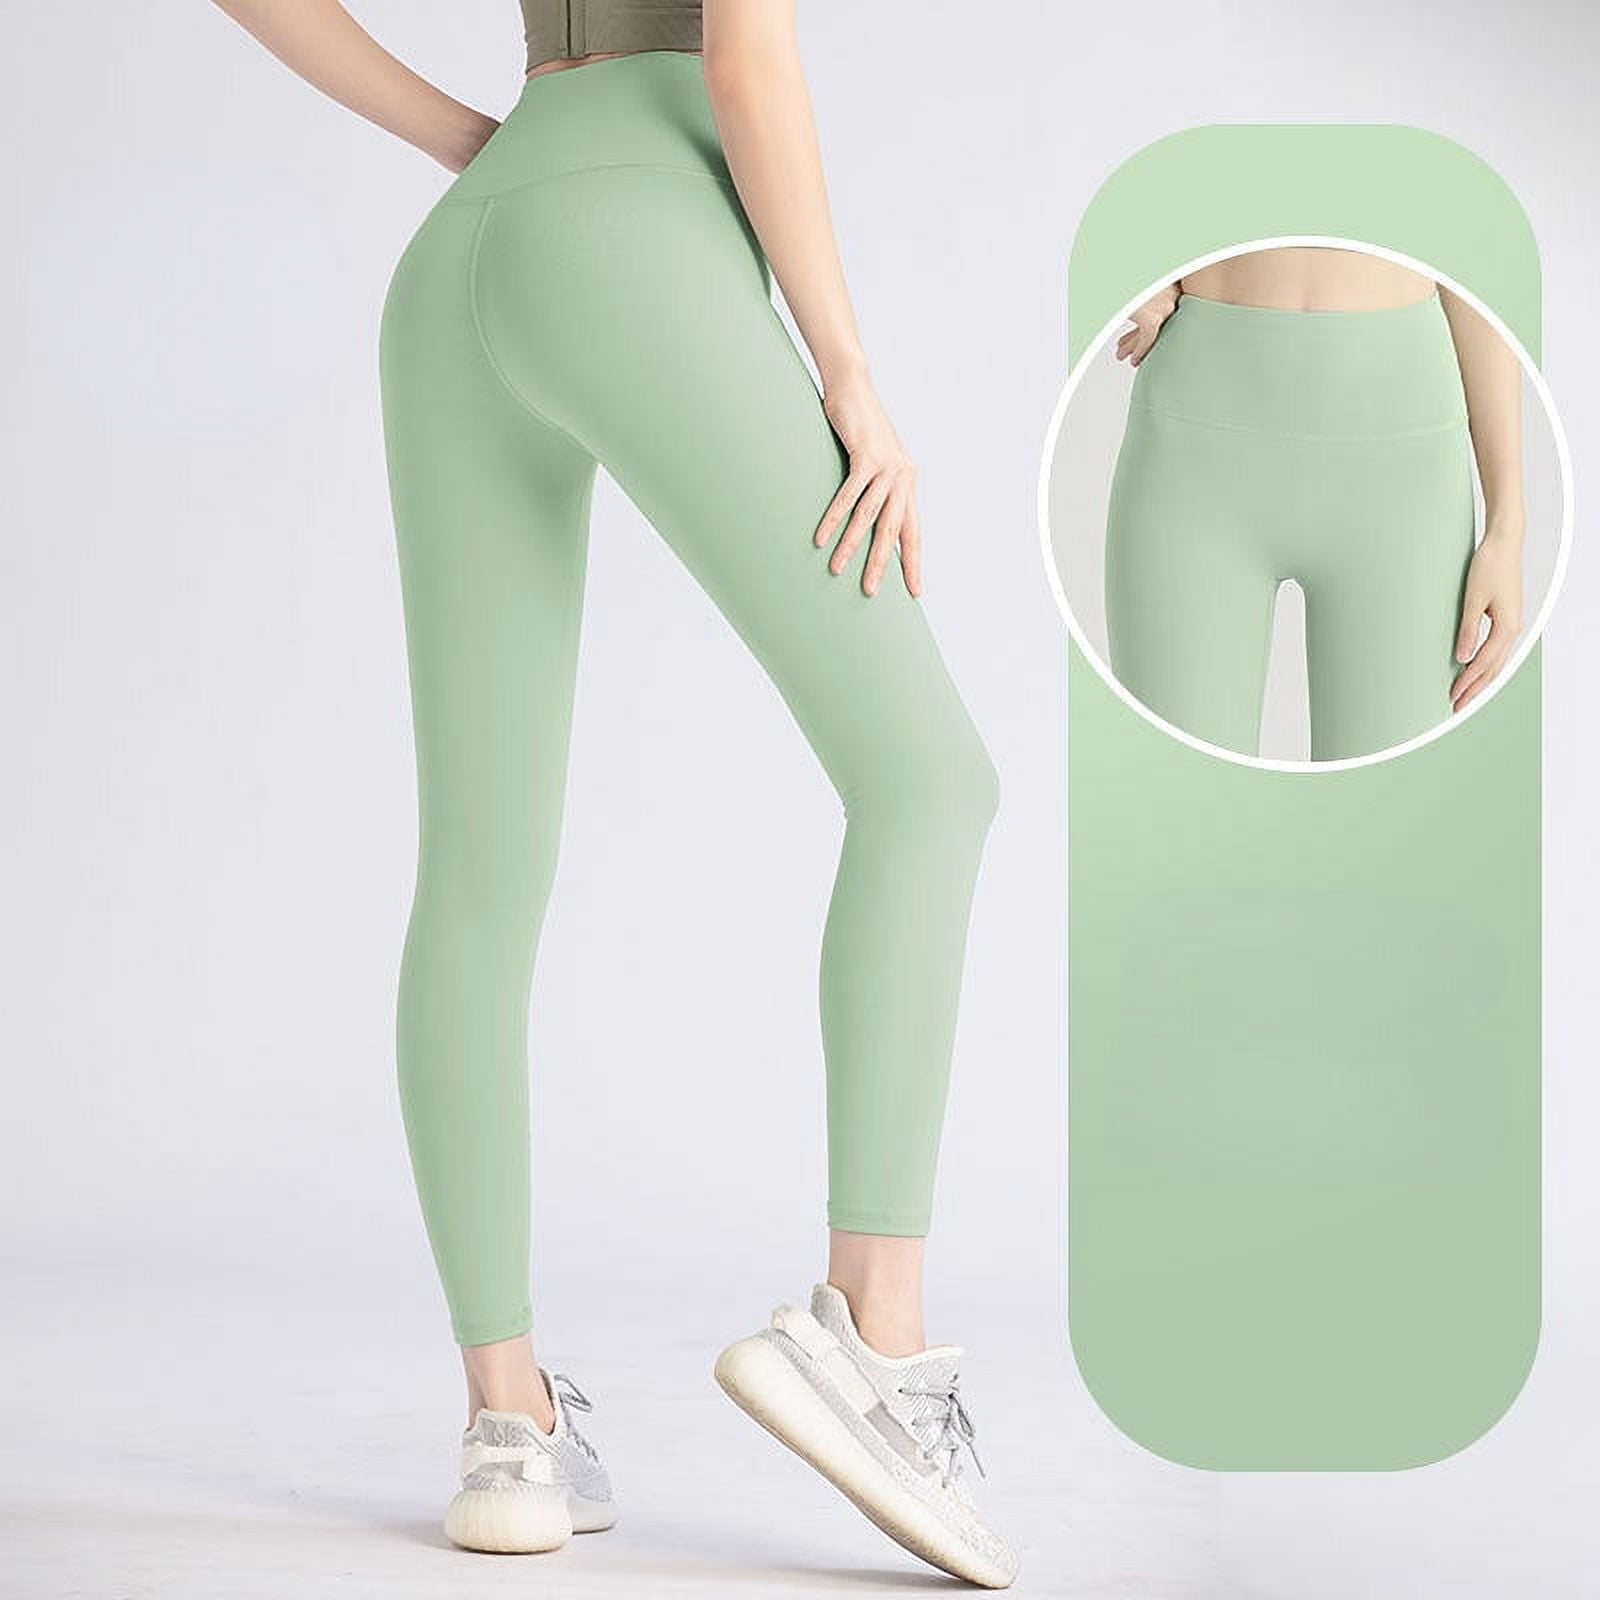 High Waist Yoga Leggings With Pockets With Side Phone Pocket Push Up Sports Pants  For Women, Running, And Fitness Sexy Peach Buttock Tights Faddish WMQ1115  From Twinsfamily, $5.29